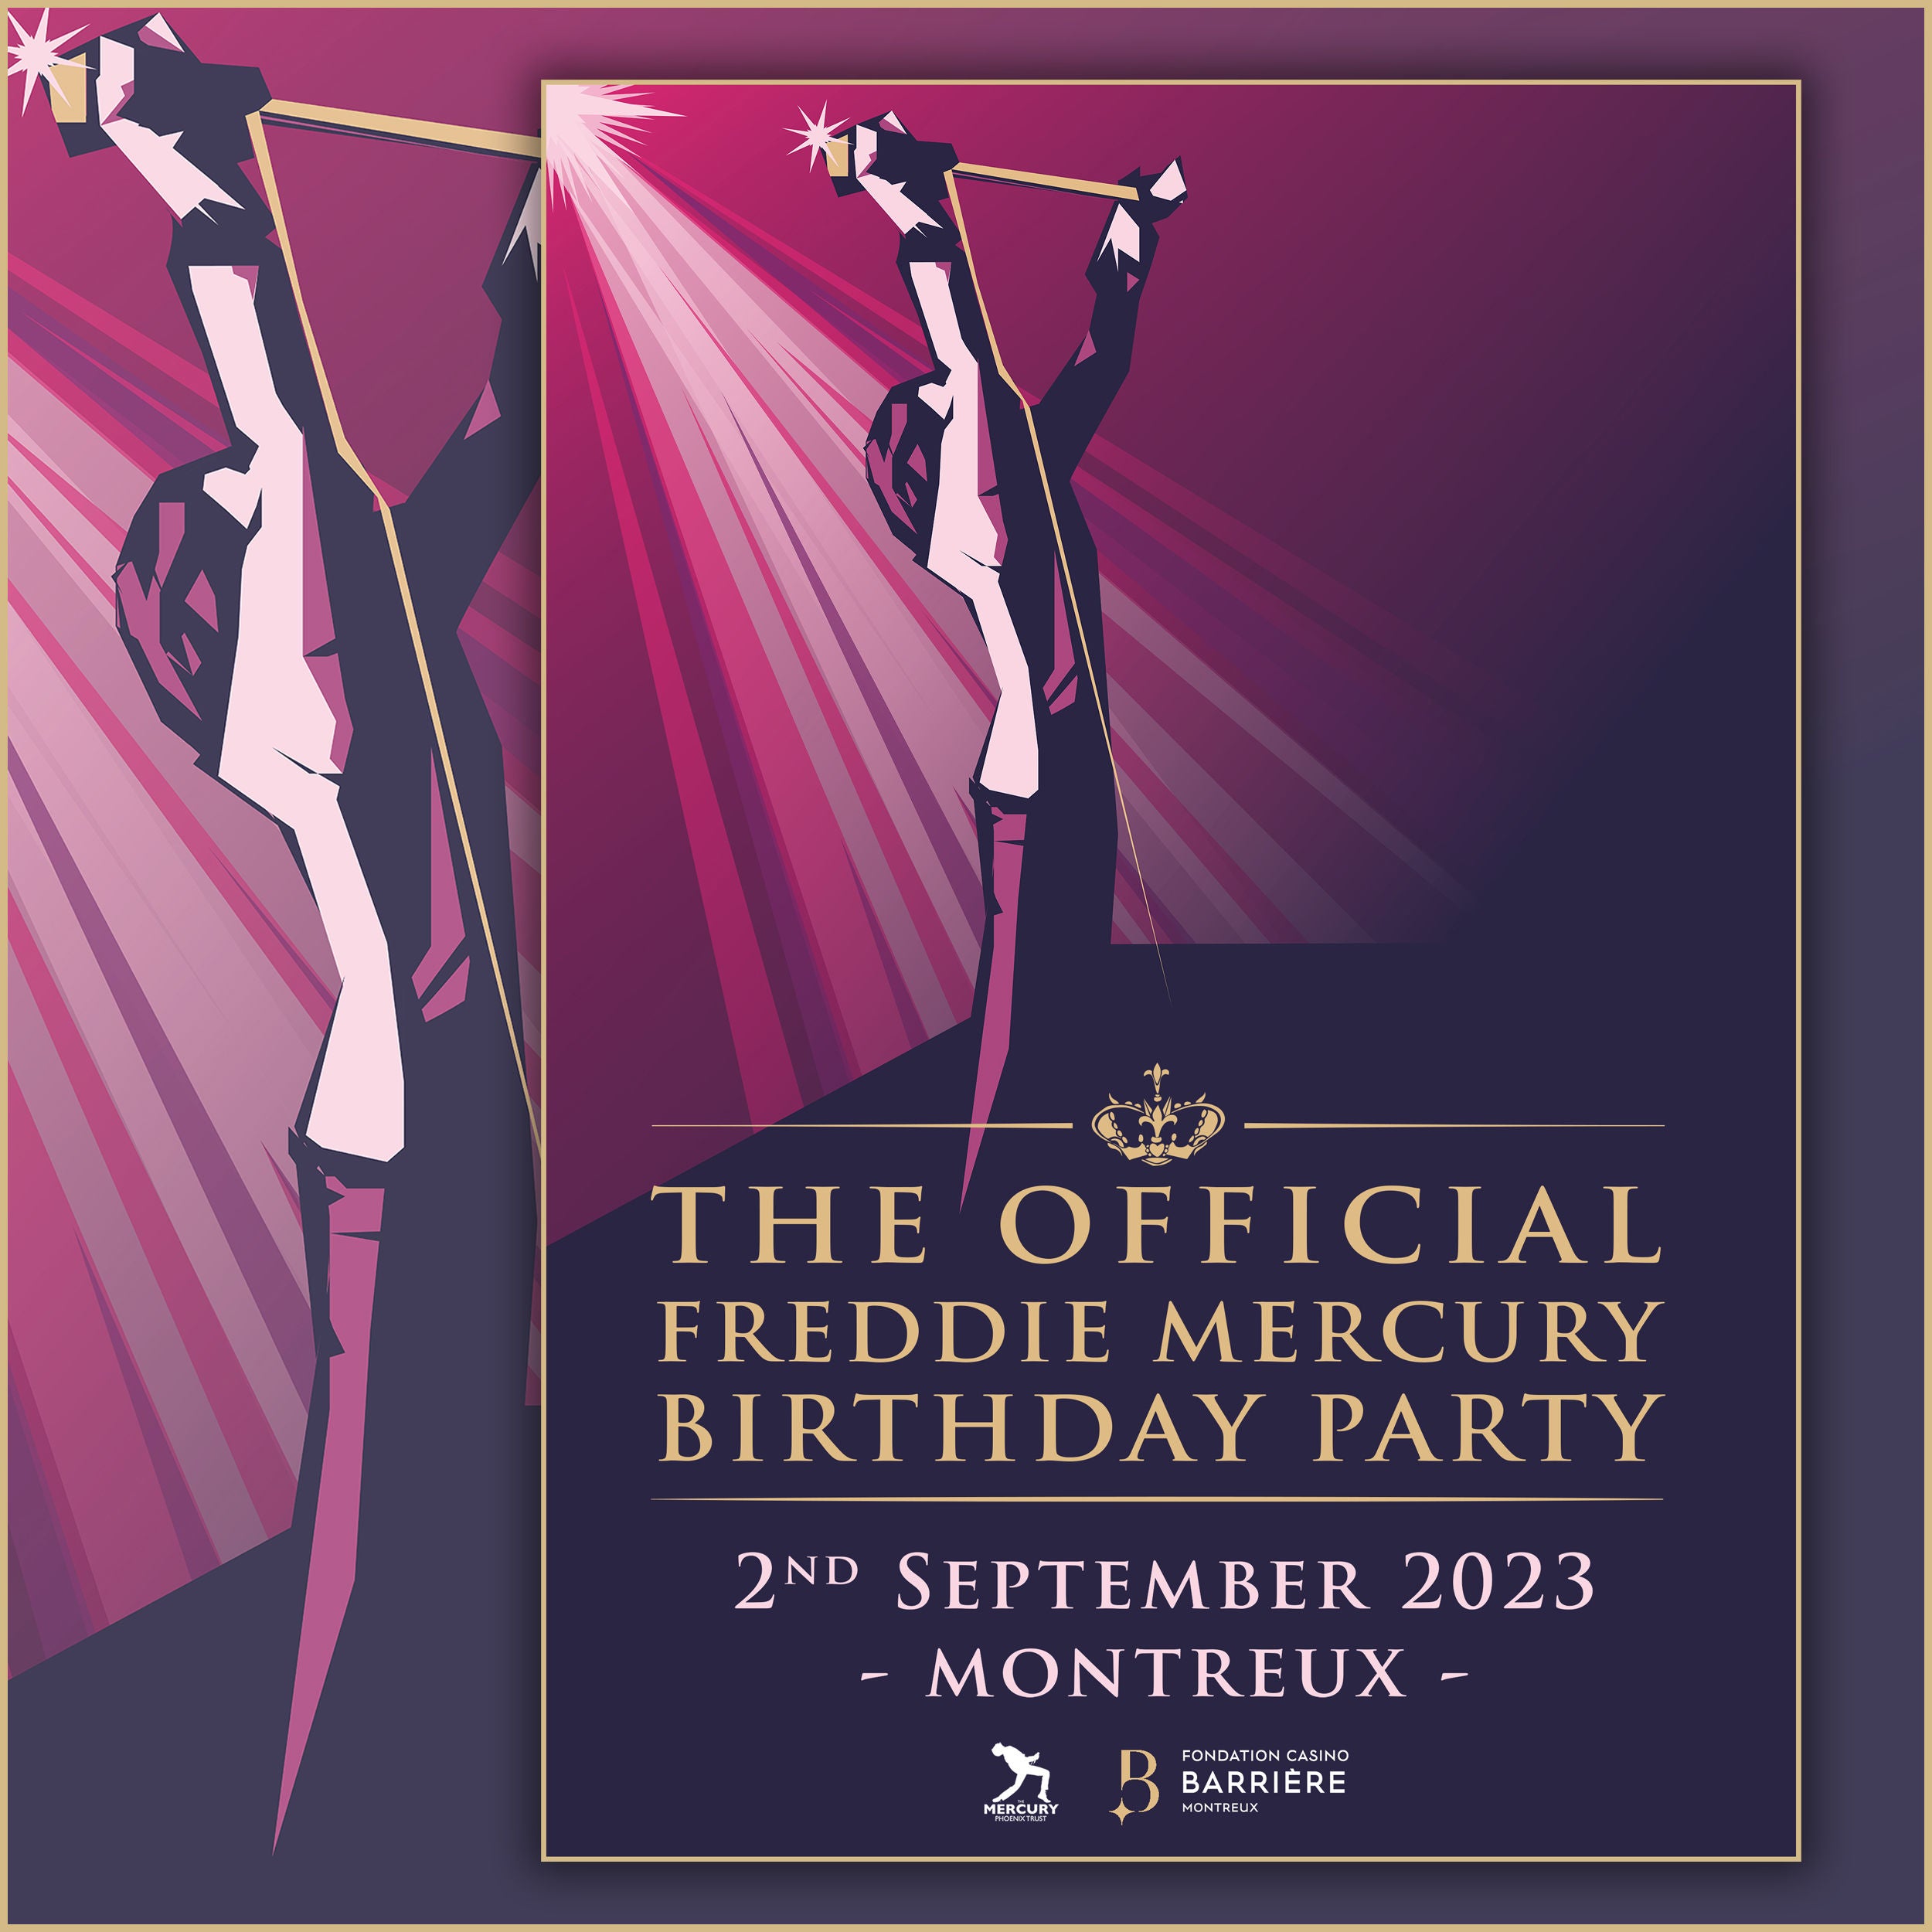 freddie for a day - Freddie Birthday Party 2023 Montreux A2 Poster Print